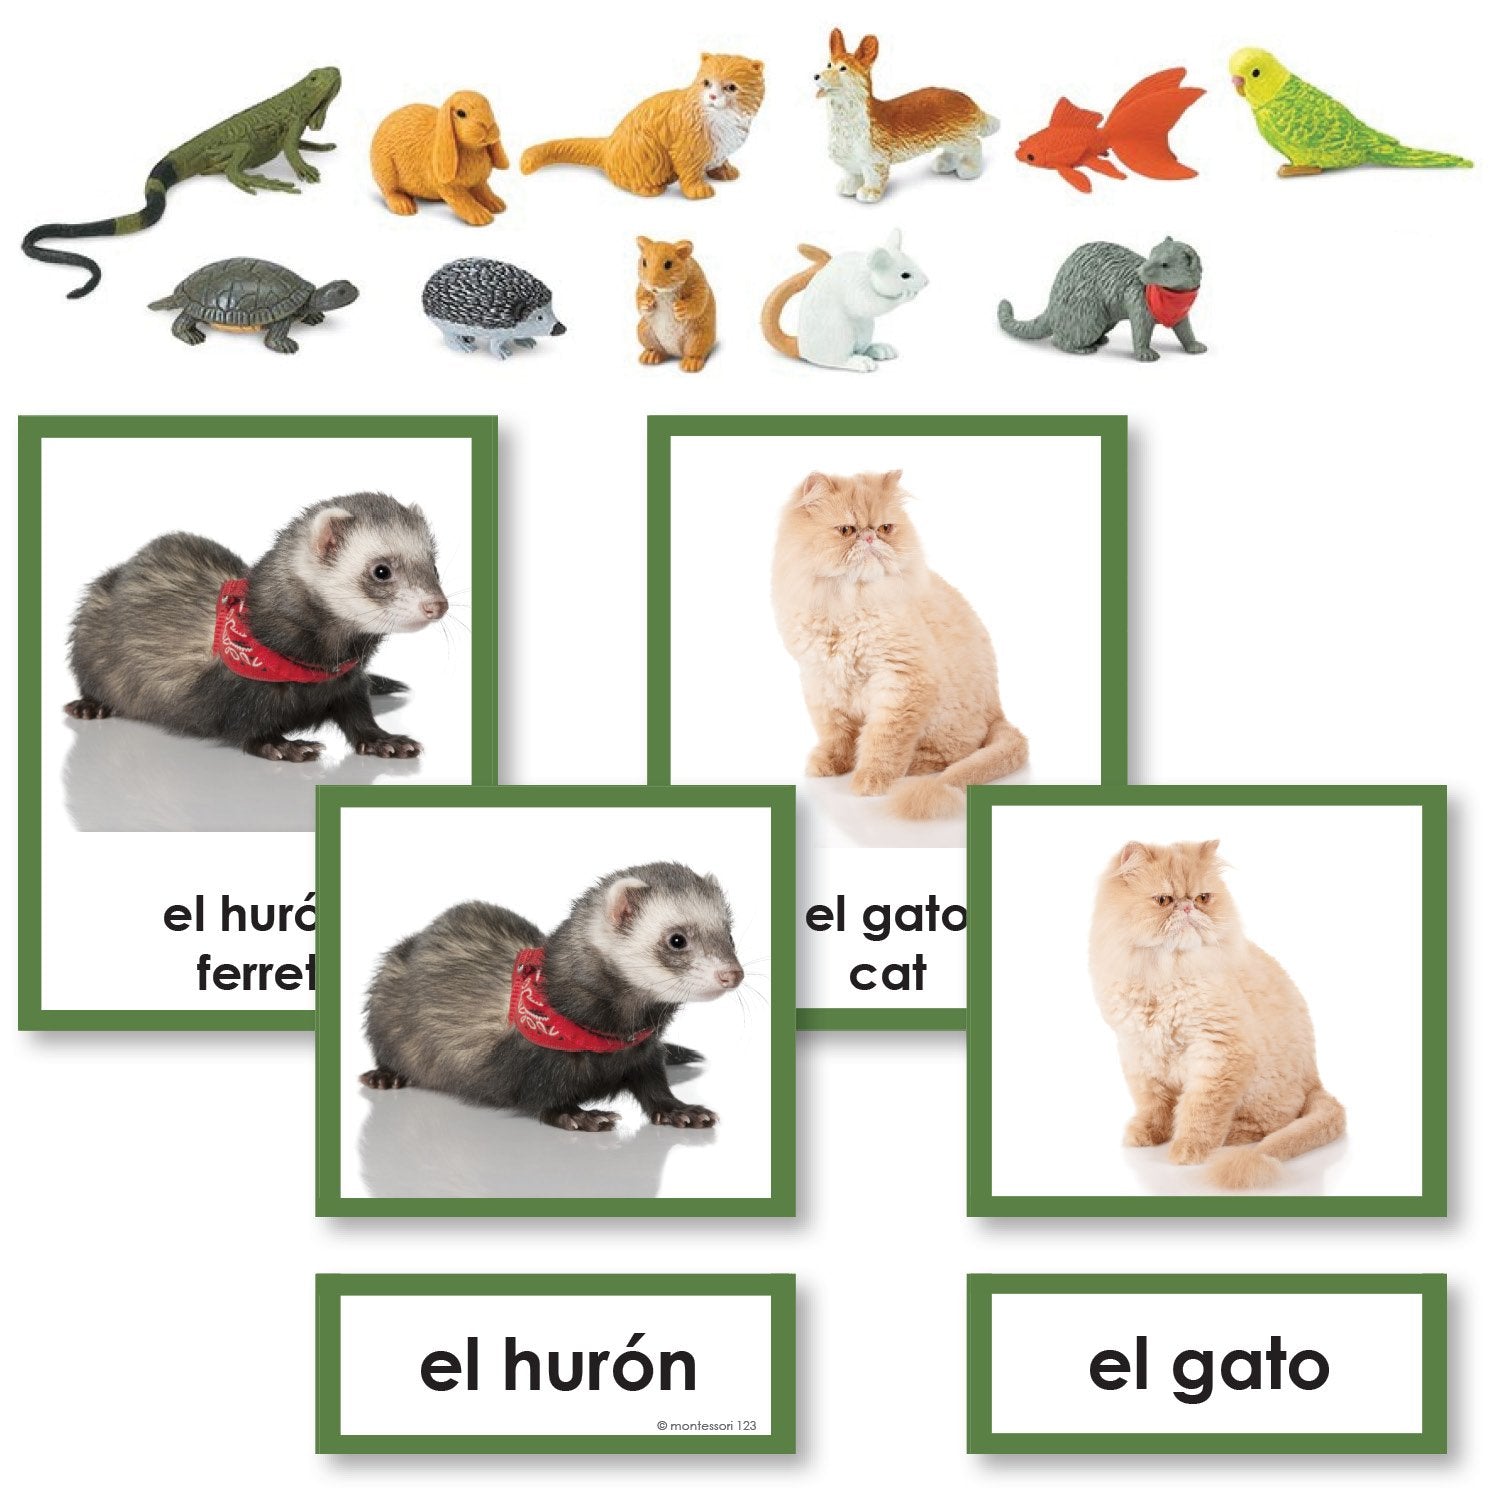 Language Arts-Spanish - Spanish Pets 3-Part Cards With Objects